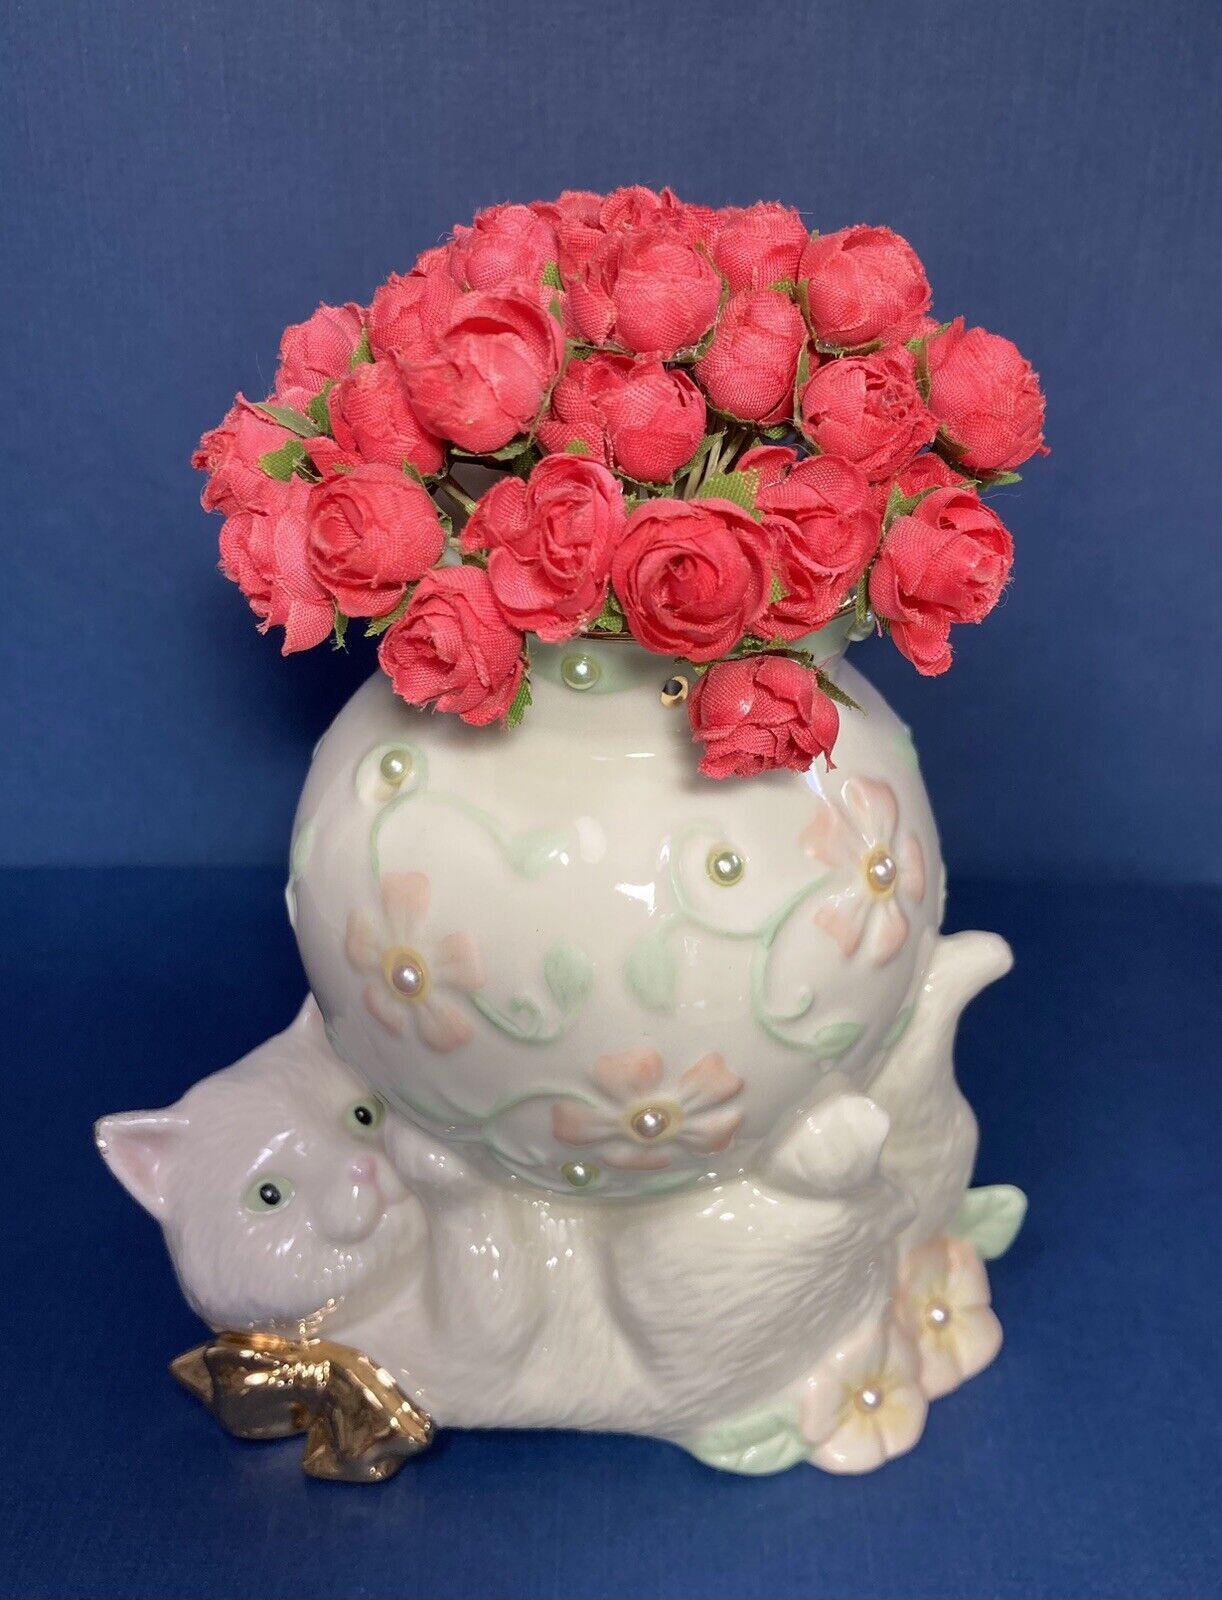 Lenox “Petals And Pearls” Cat With A ￼Vase Of Roses” Fine China 24k Gold Accents